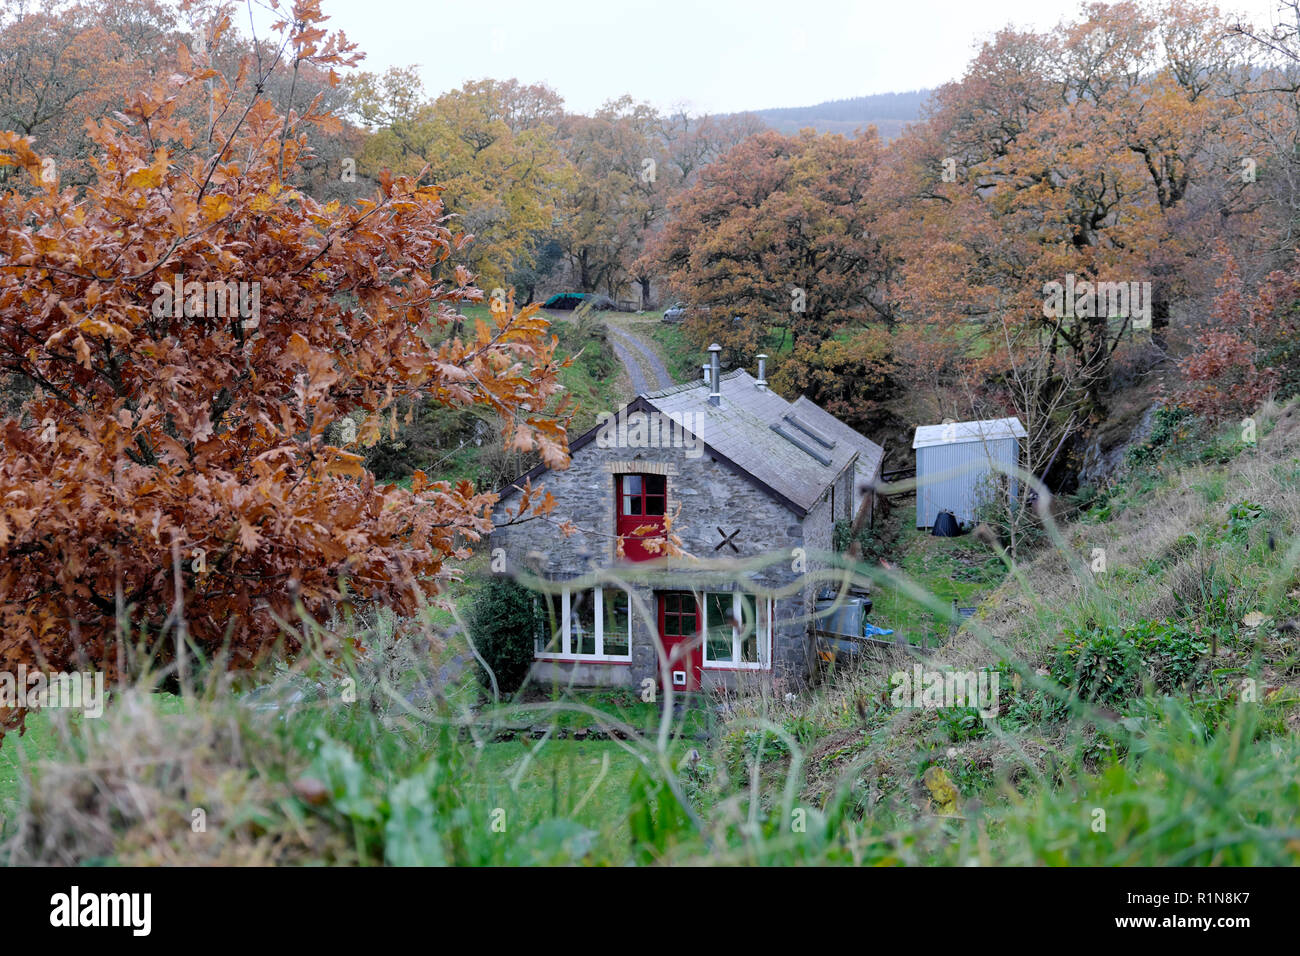 View of a converted barn house home stone cottage in autumn in rural  countryside with oak trees and oak leaves Carmarthenshire Wales UK  KATHY DEWITT Stock Photo